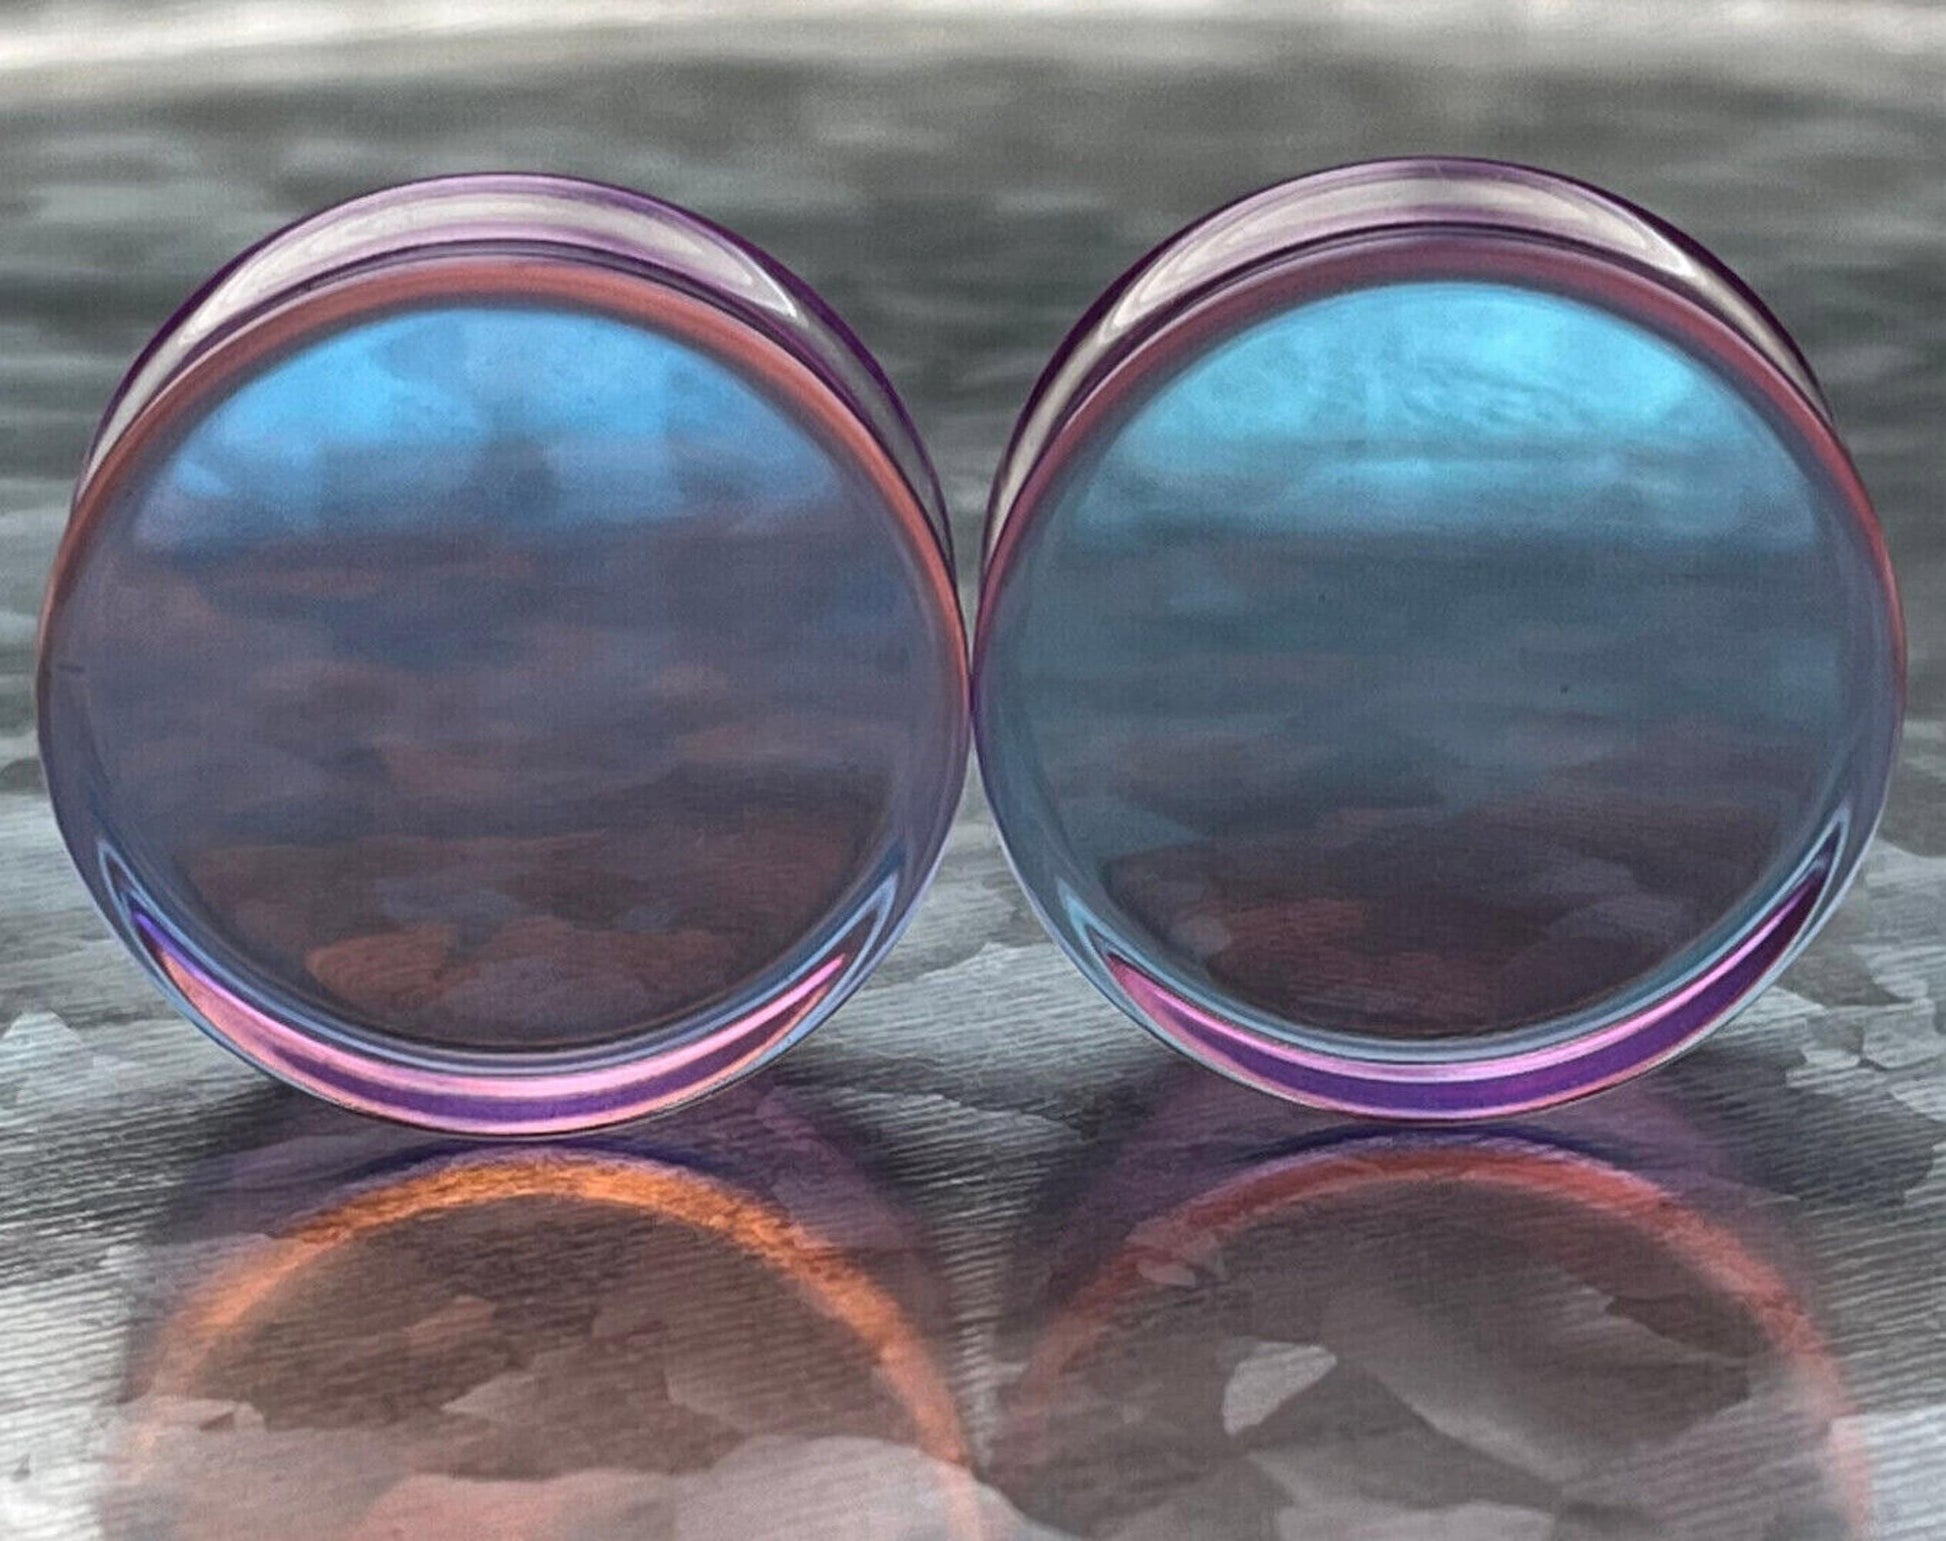 PAIR of Beautiful Mermaid Iridescent Glass Double Flare Plugs - Gauges 2g (6mm) thru 1" (25mm) available!